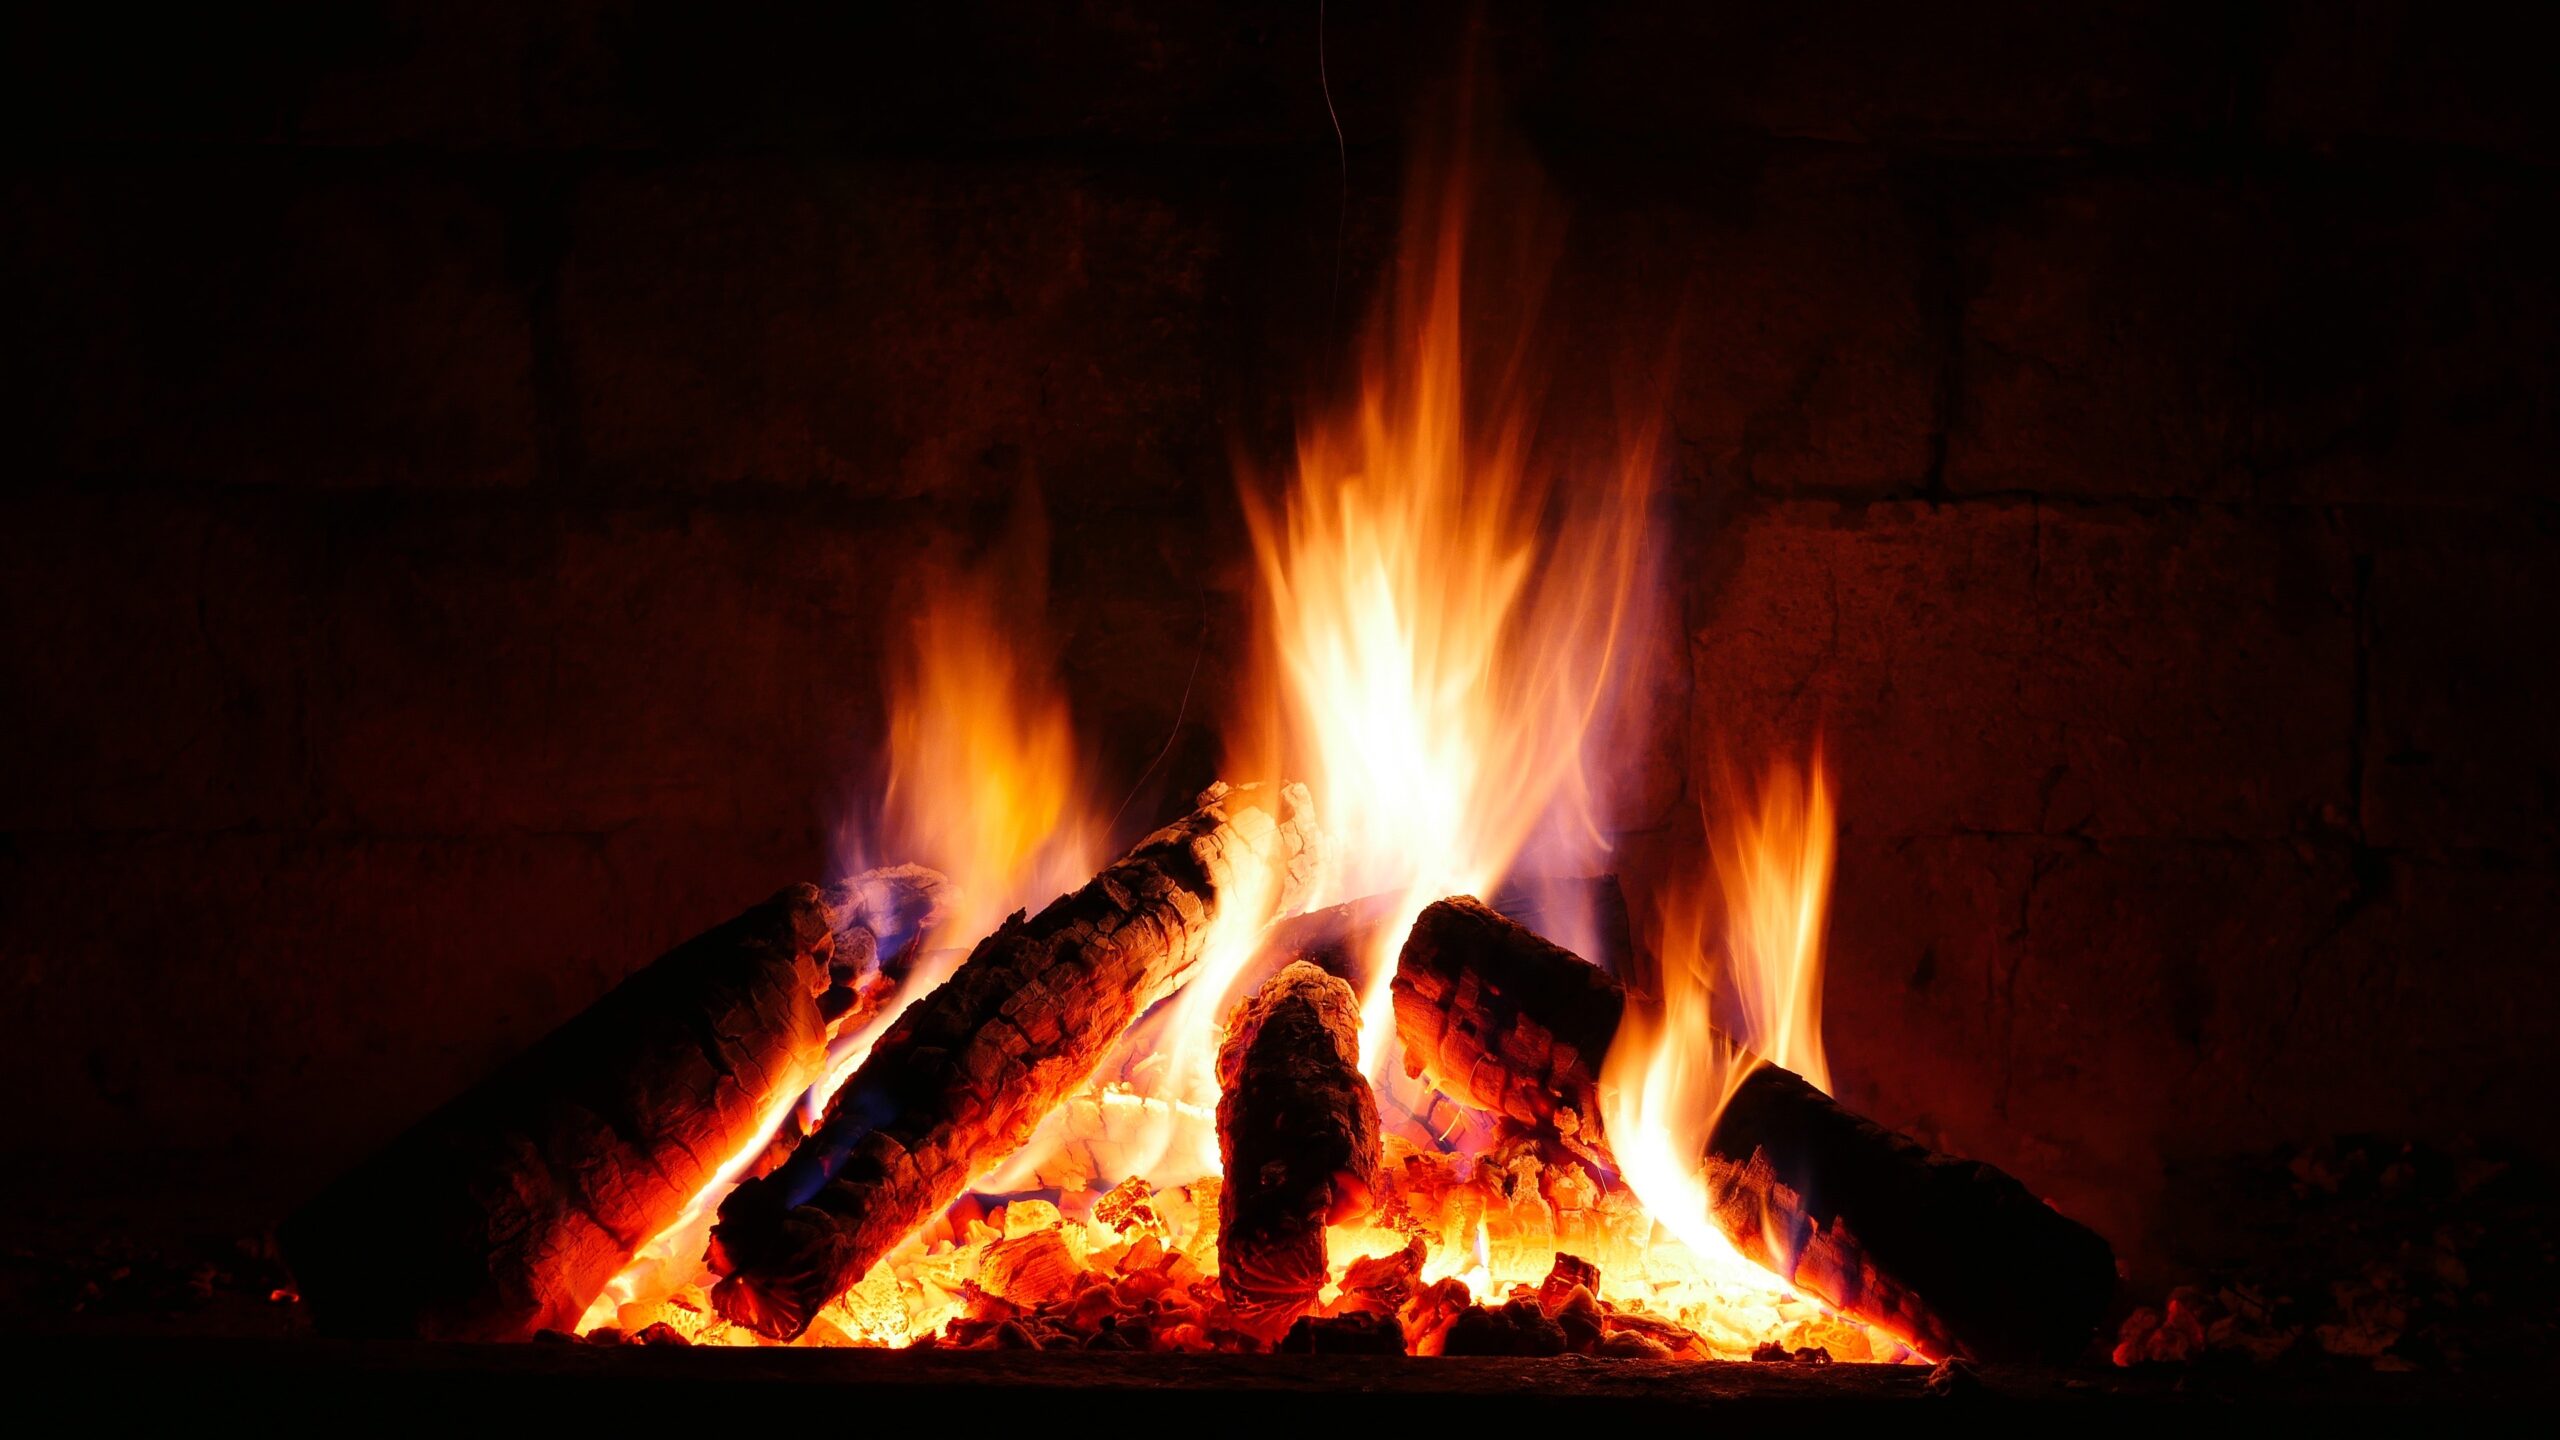 Tinder vs Kindling – 5 Ways to a Roaring Fire